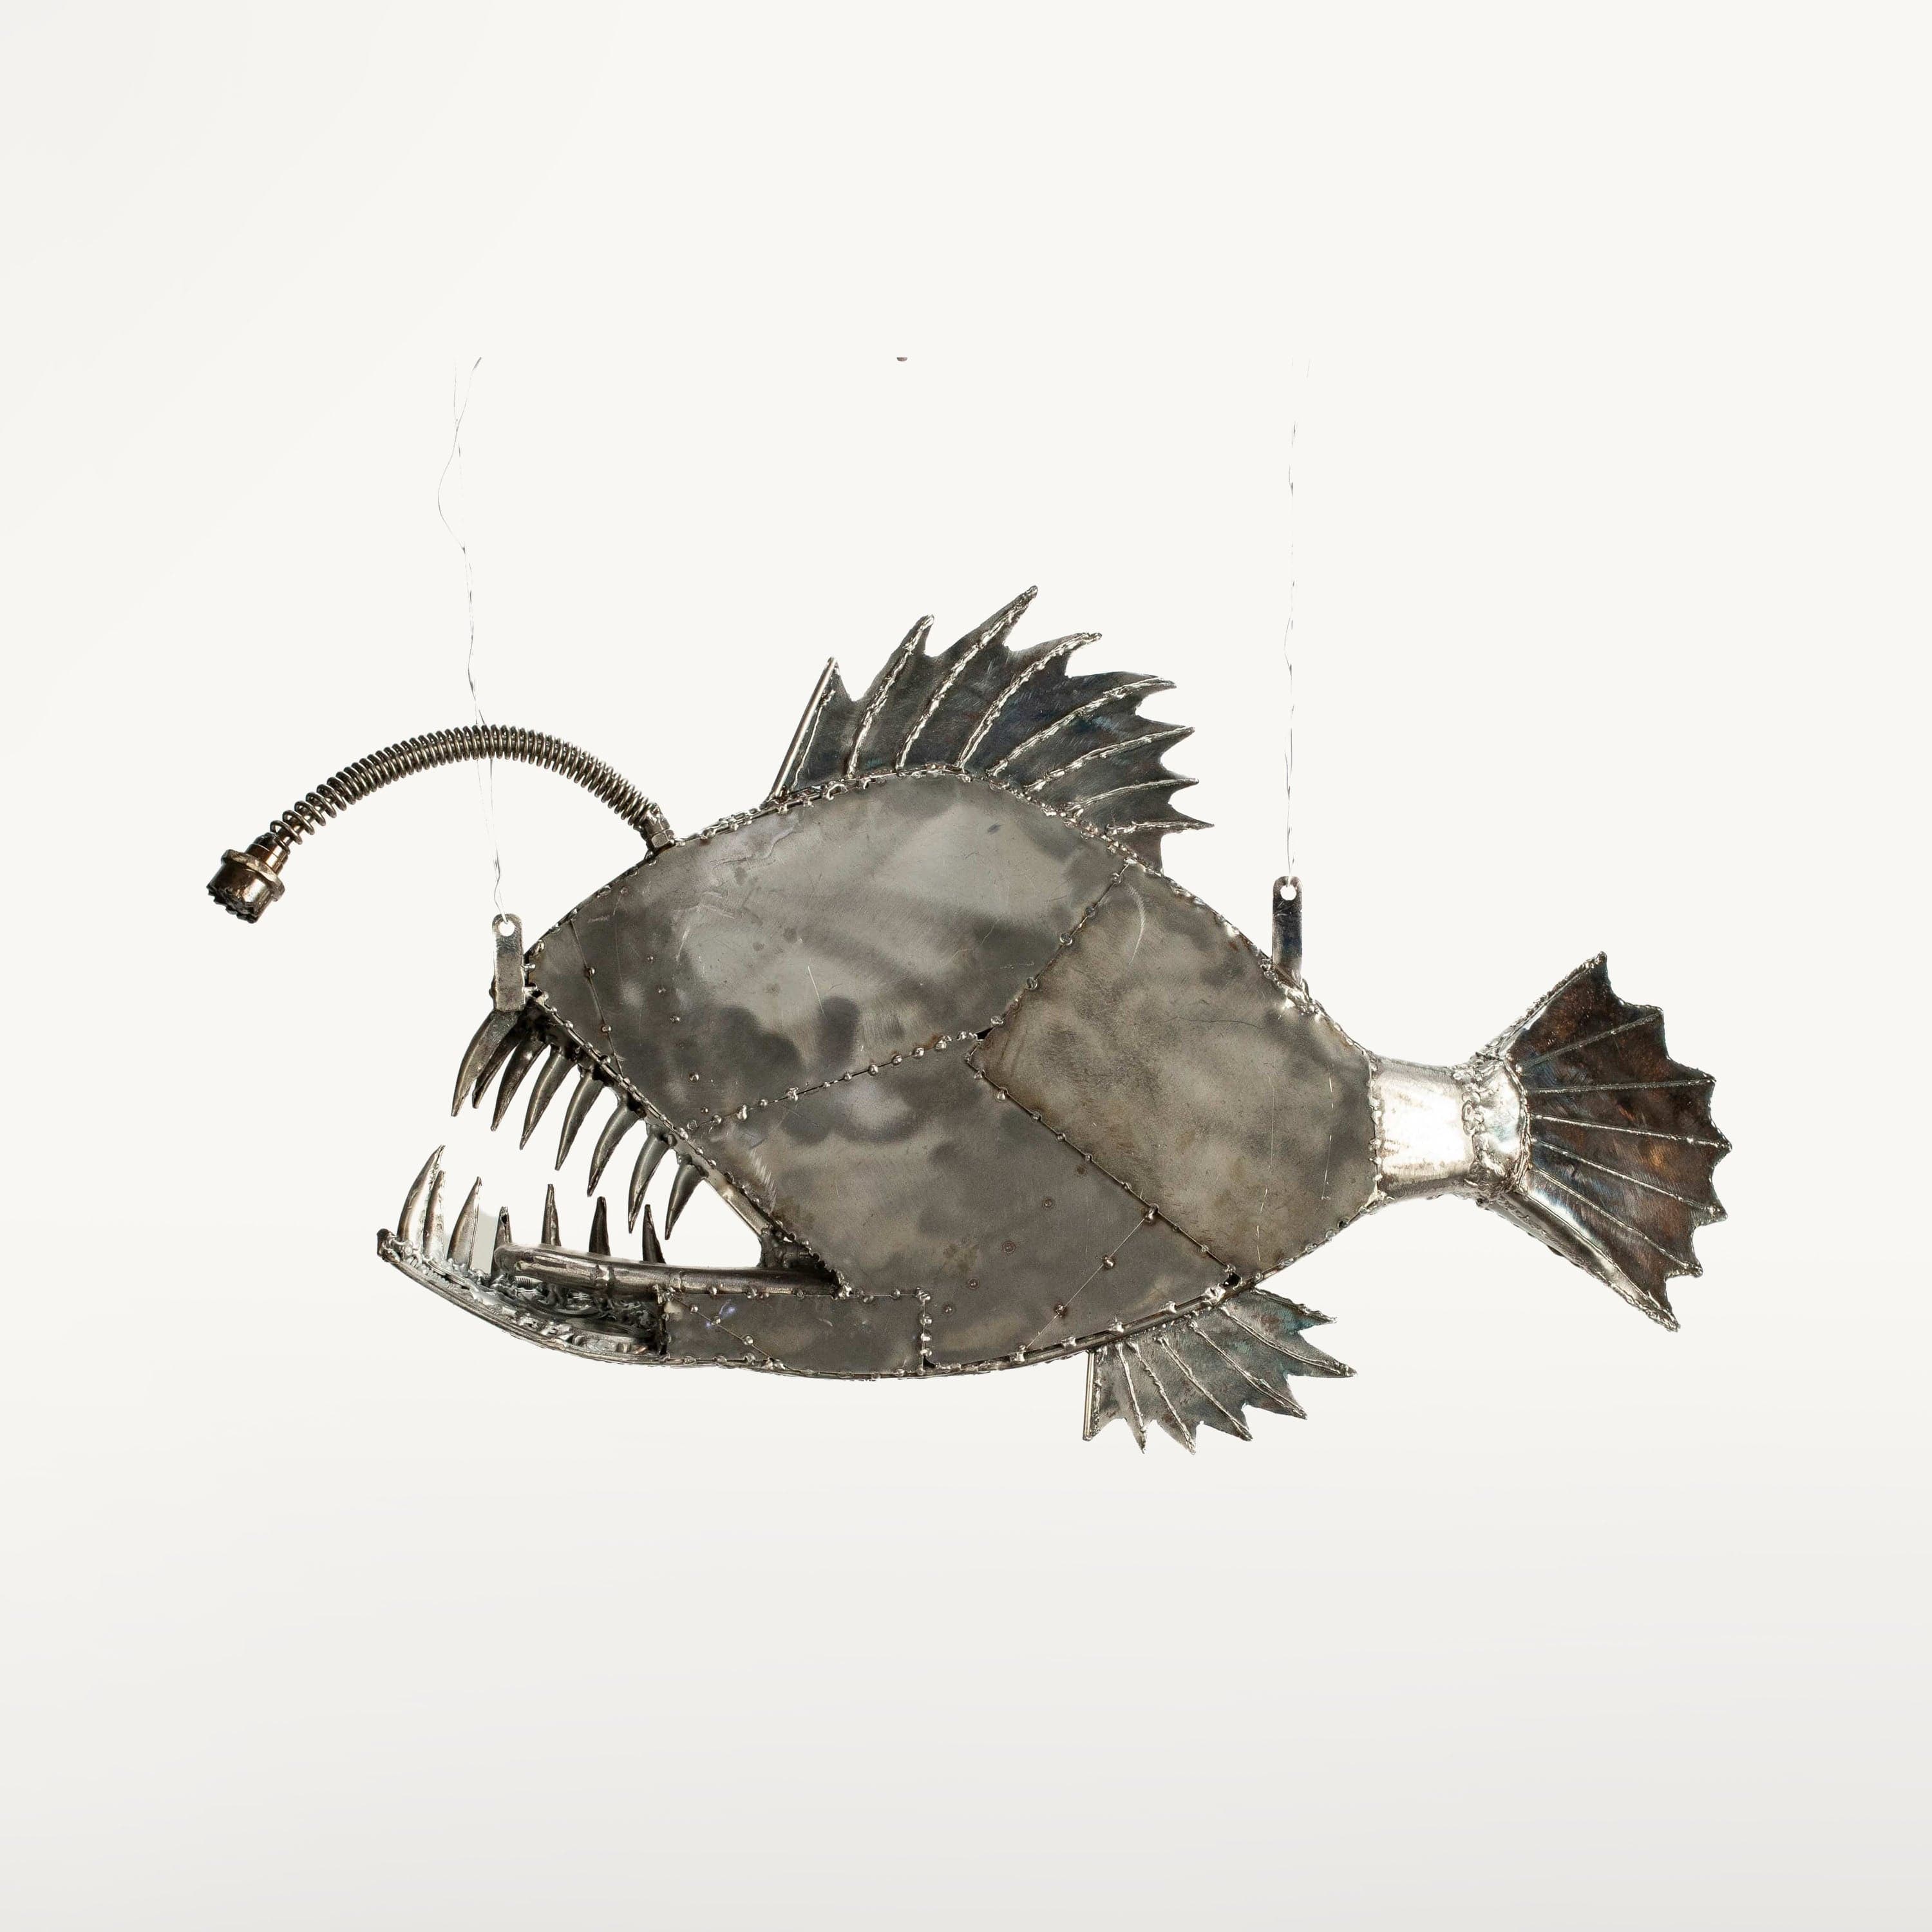 KALIFANO Recycled Metal Art 28" Anglerfish (Right) Inspired Recycled Metal Art Sculpture RMS-AFR70x50-PK